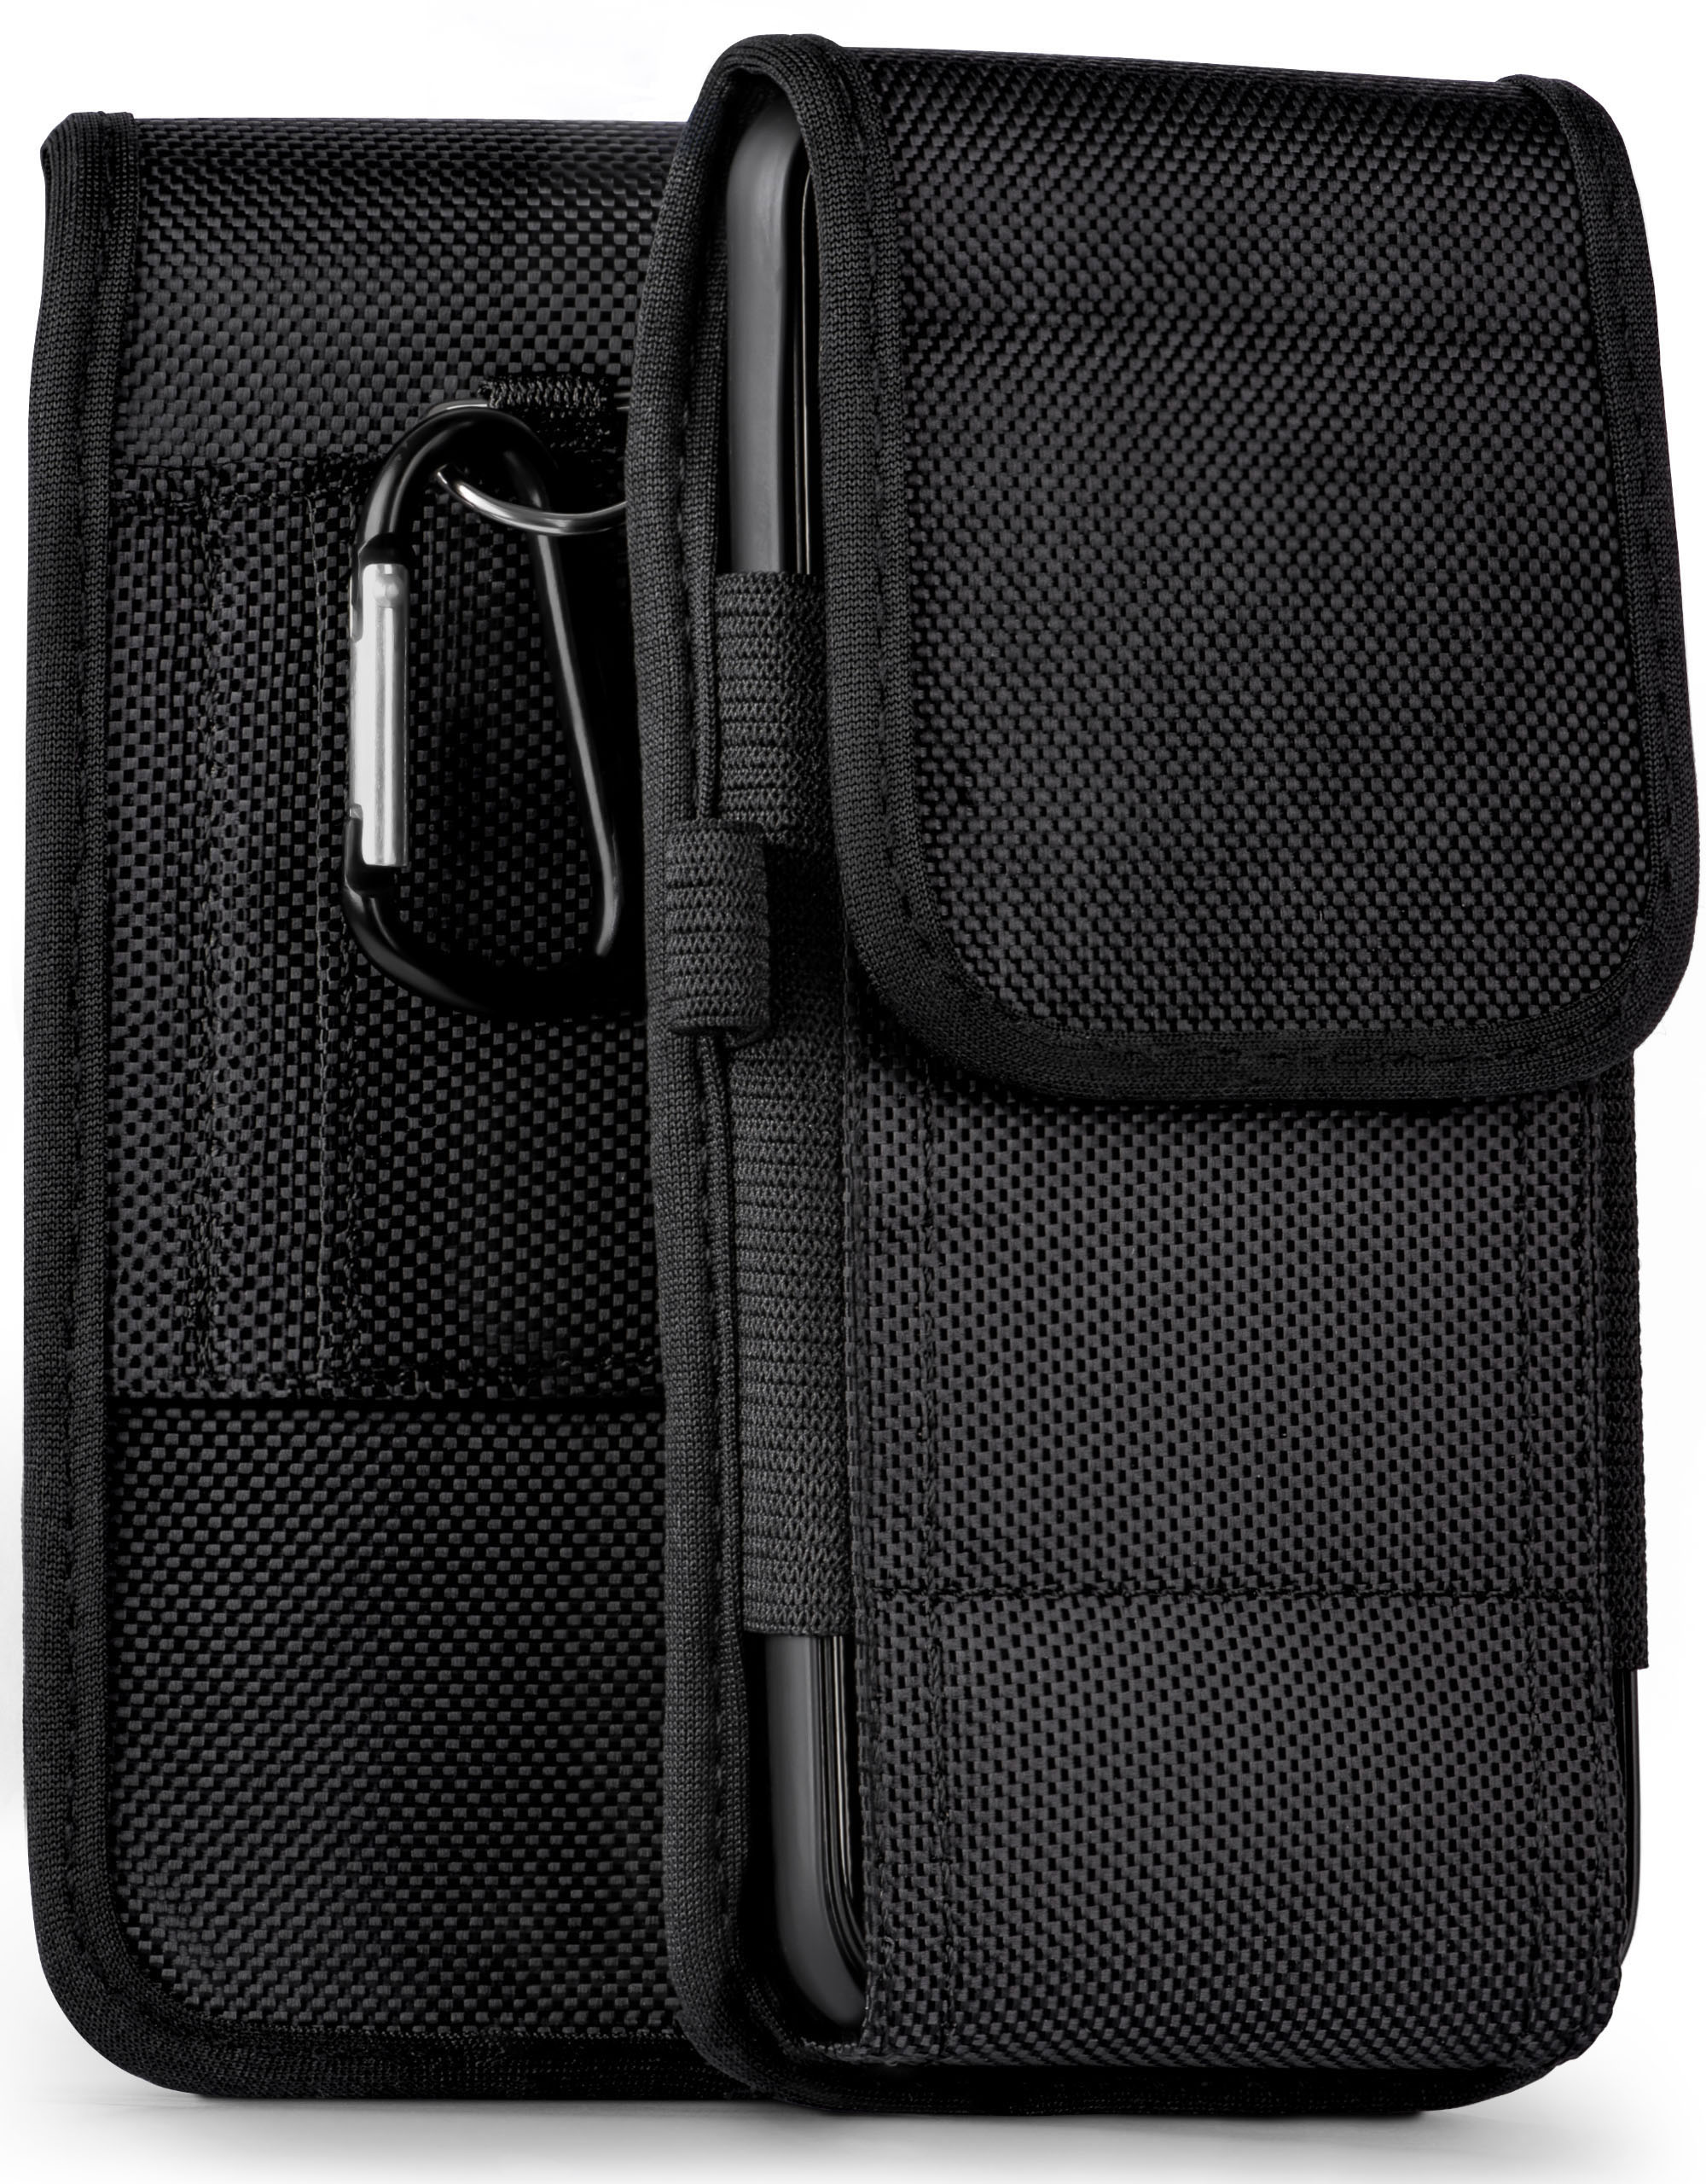 GS185, Case, Holster, MOEX Trail Gigaset, Agility